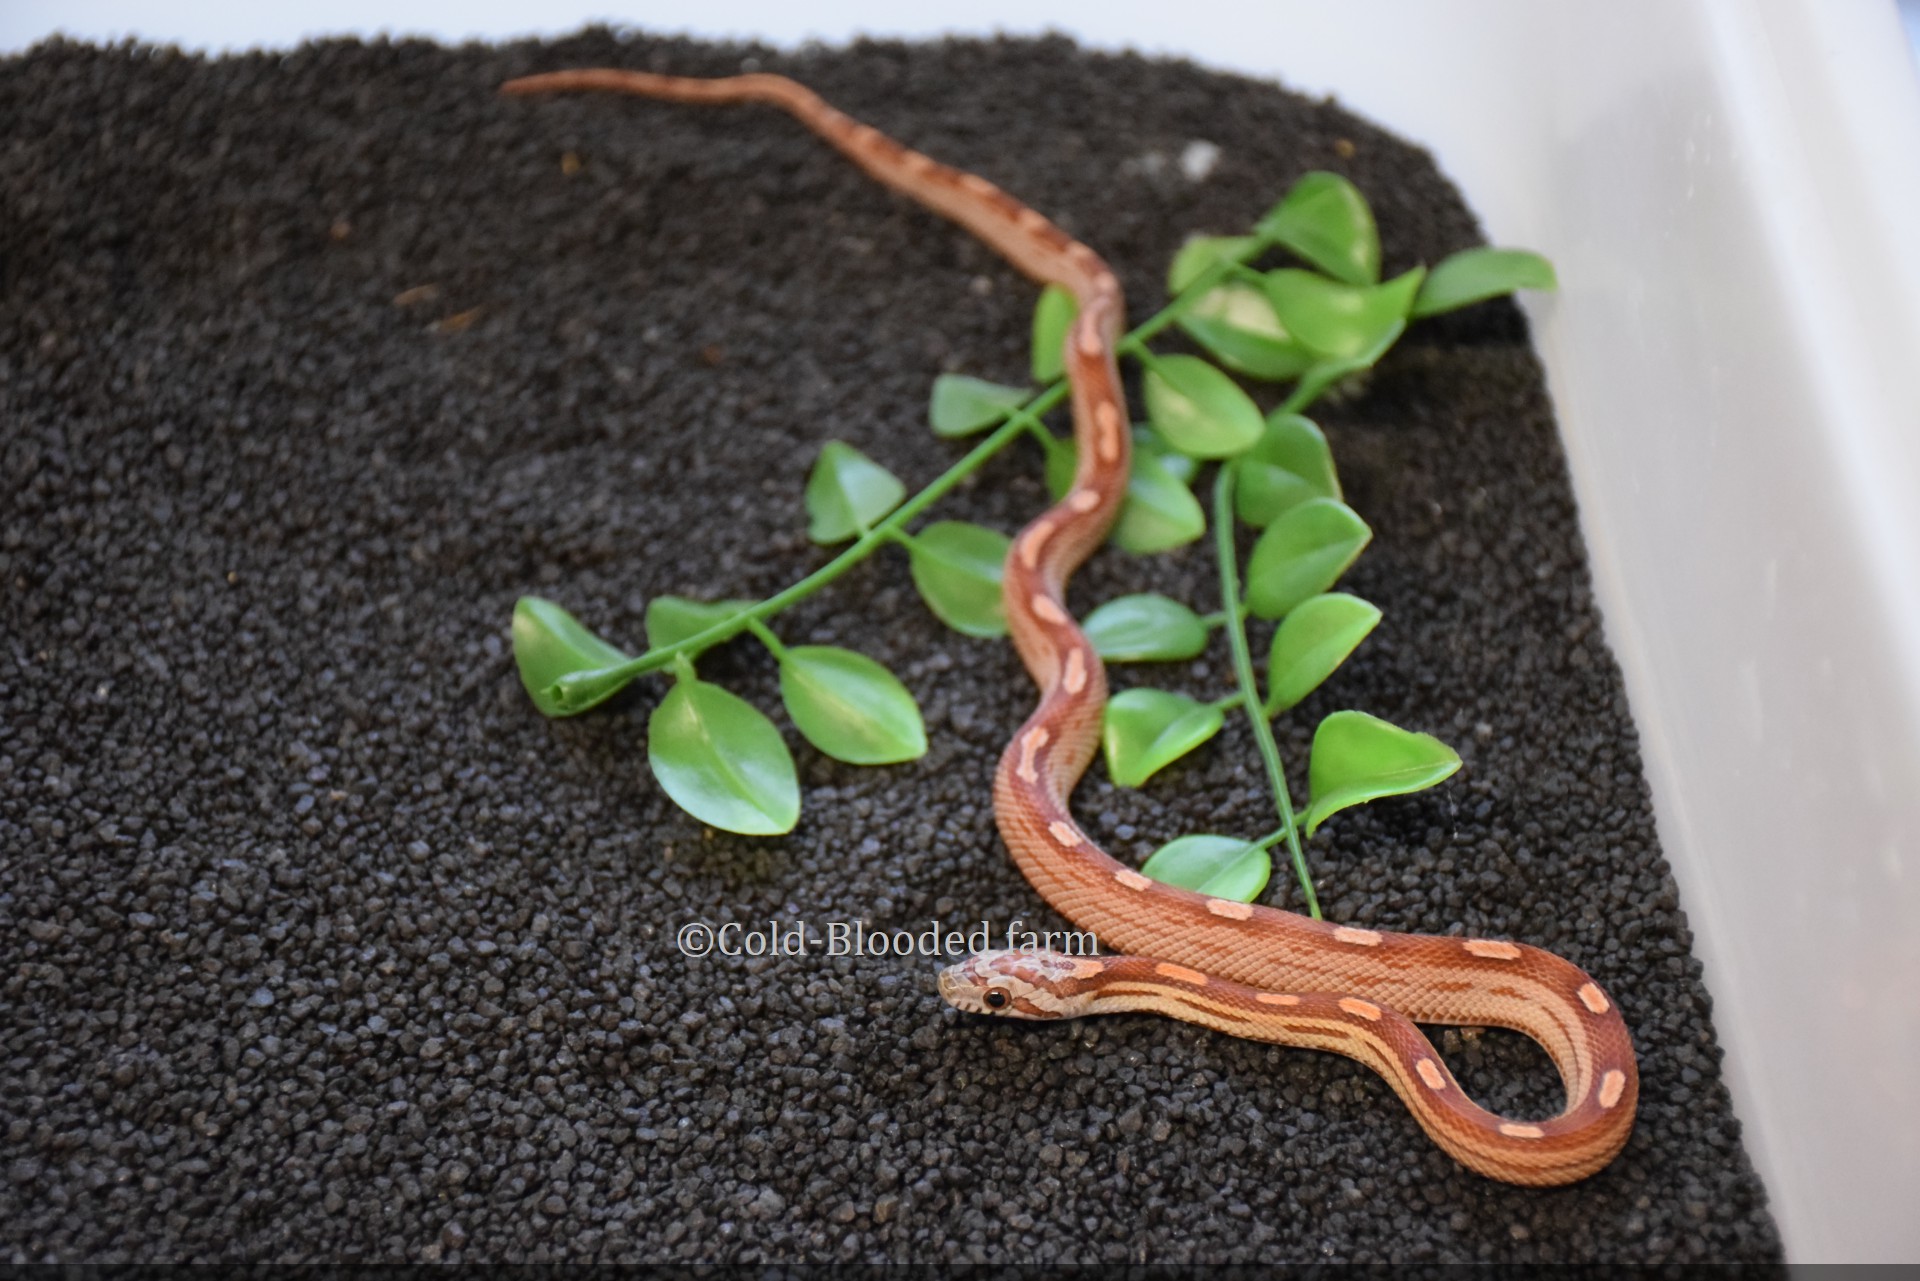 Motley Corn Snake by Cold-Blooded farm